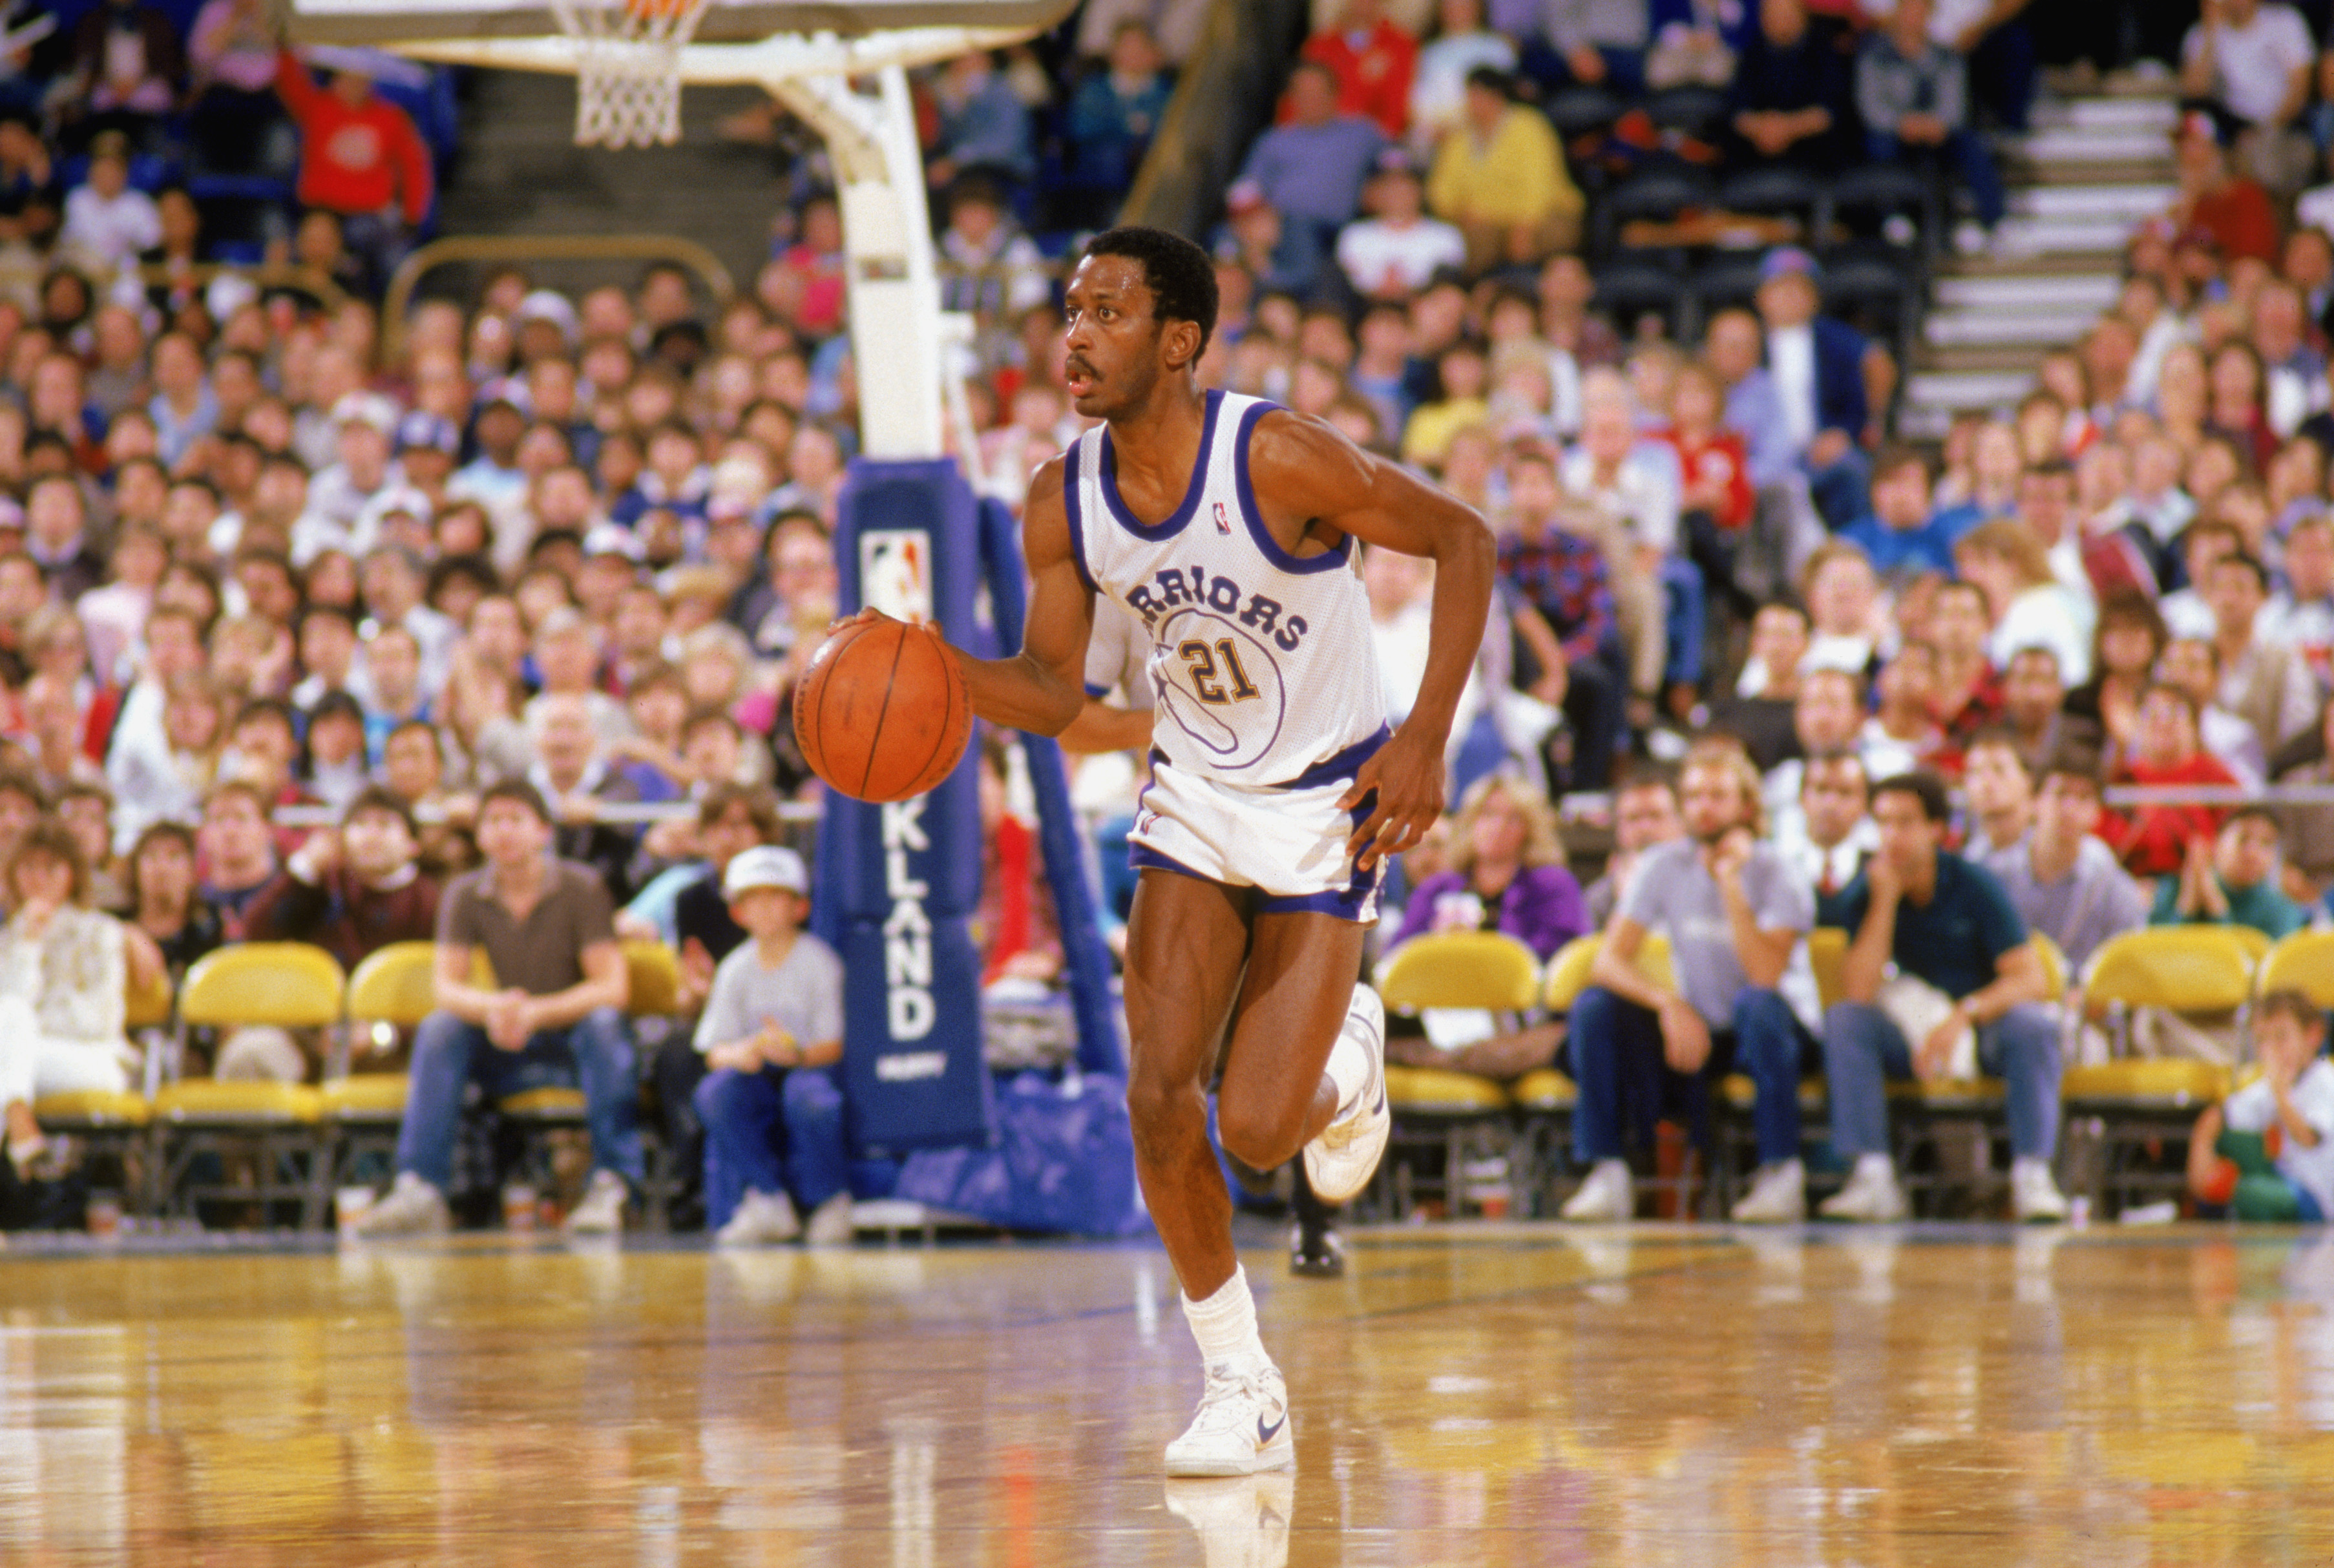 1988:  Eric Sleepy Floyd #21 of the Golden State Warriors drives upcourt during an NBA game in the 1988-89 season. NOTE TO USER: User expressly acknowledges and agrees that, by downloading and/or using this Photograph, User is consenting to the terms and